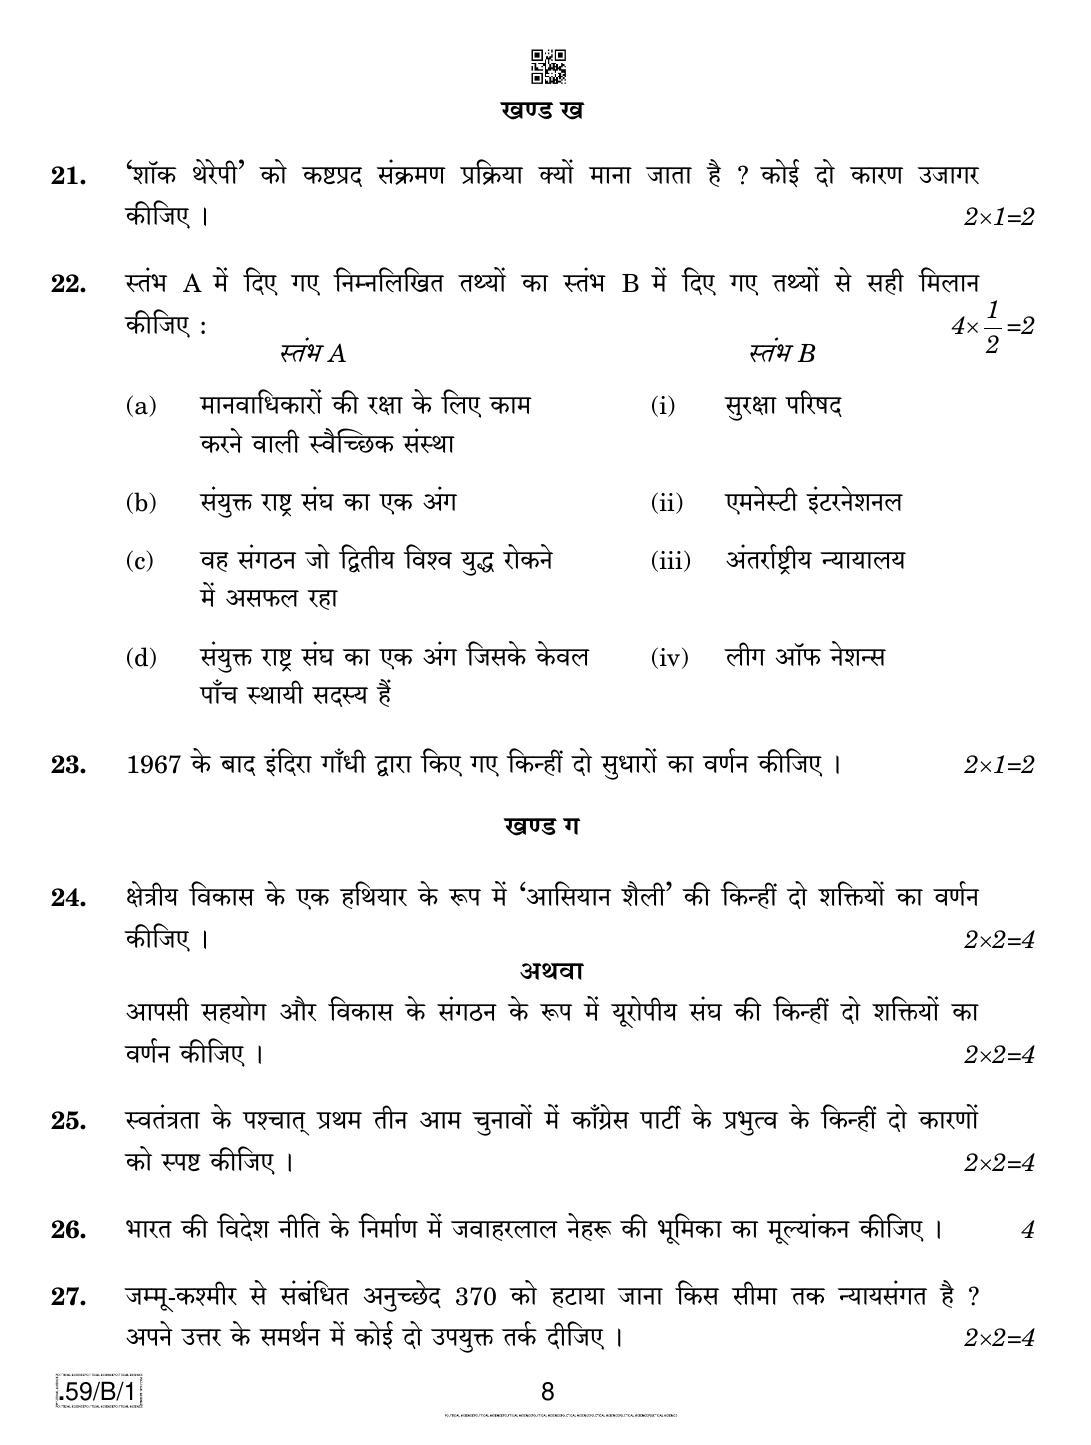 CBSE Class 12 59-C-1 - Political Science 2020 Compartment Question Paper - Page 8